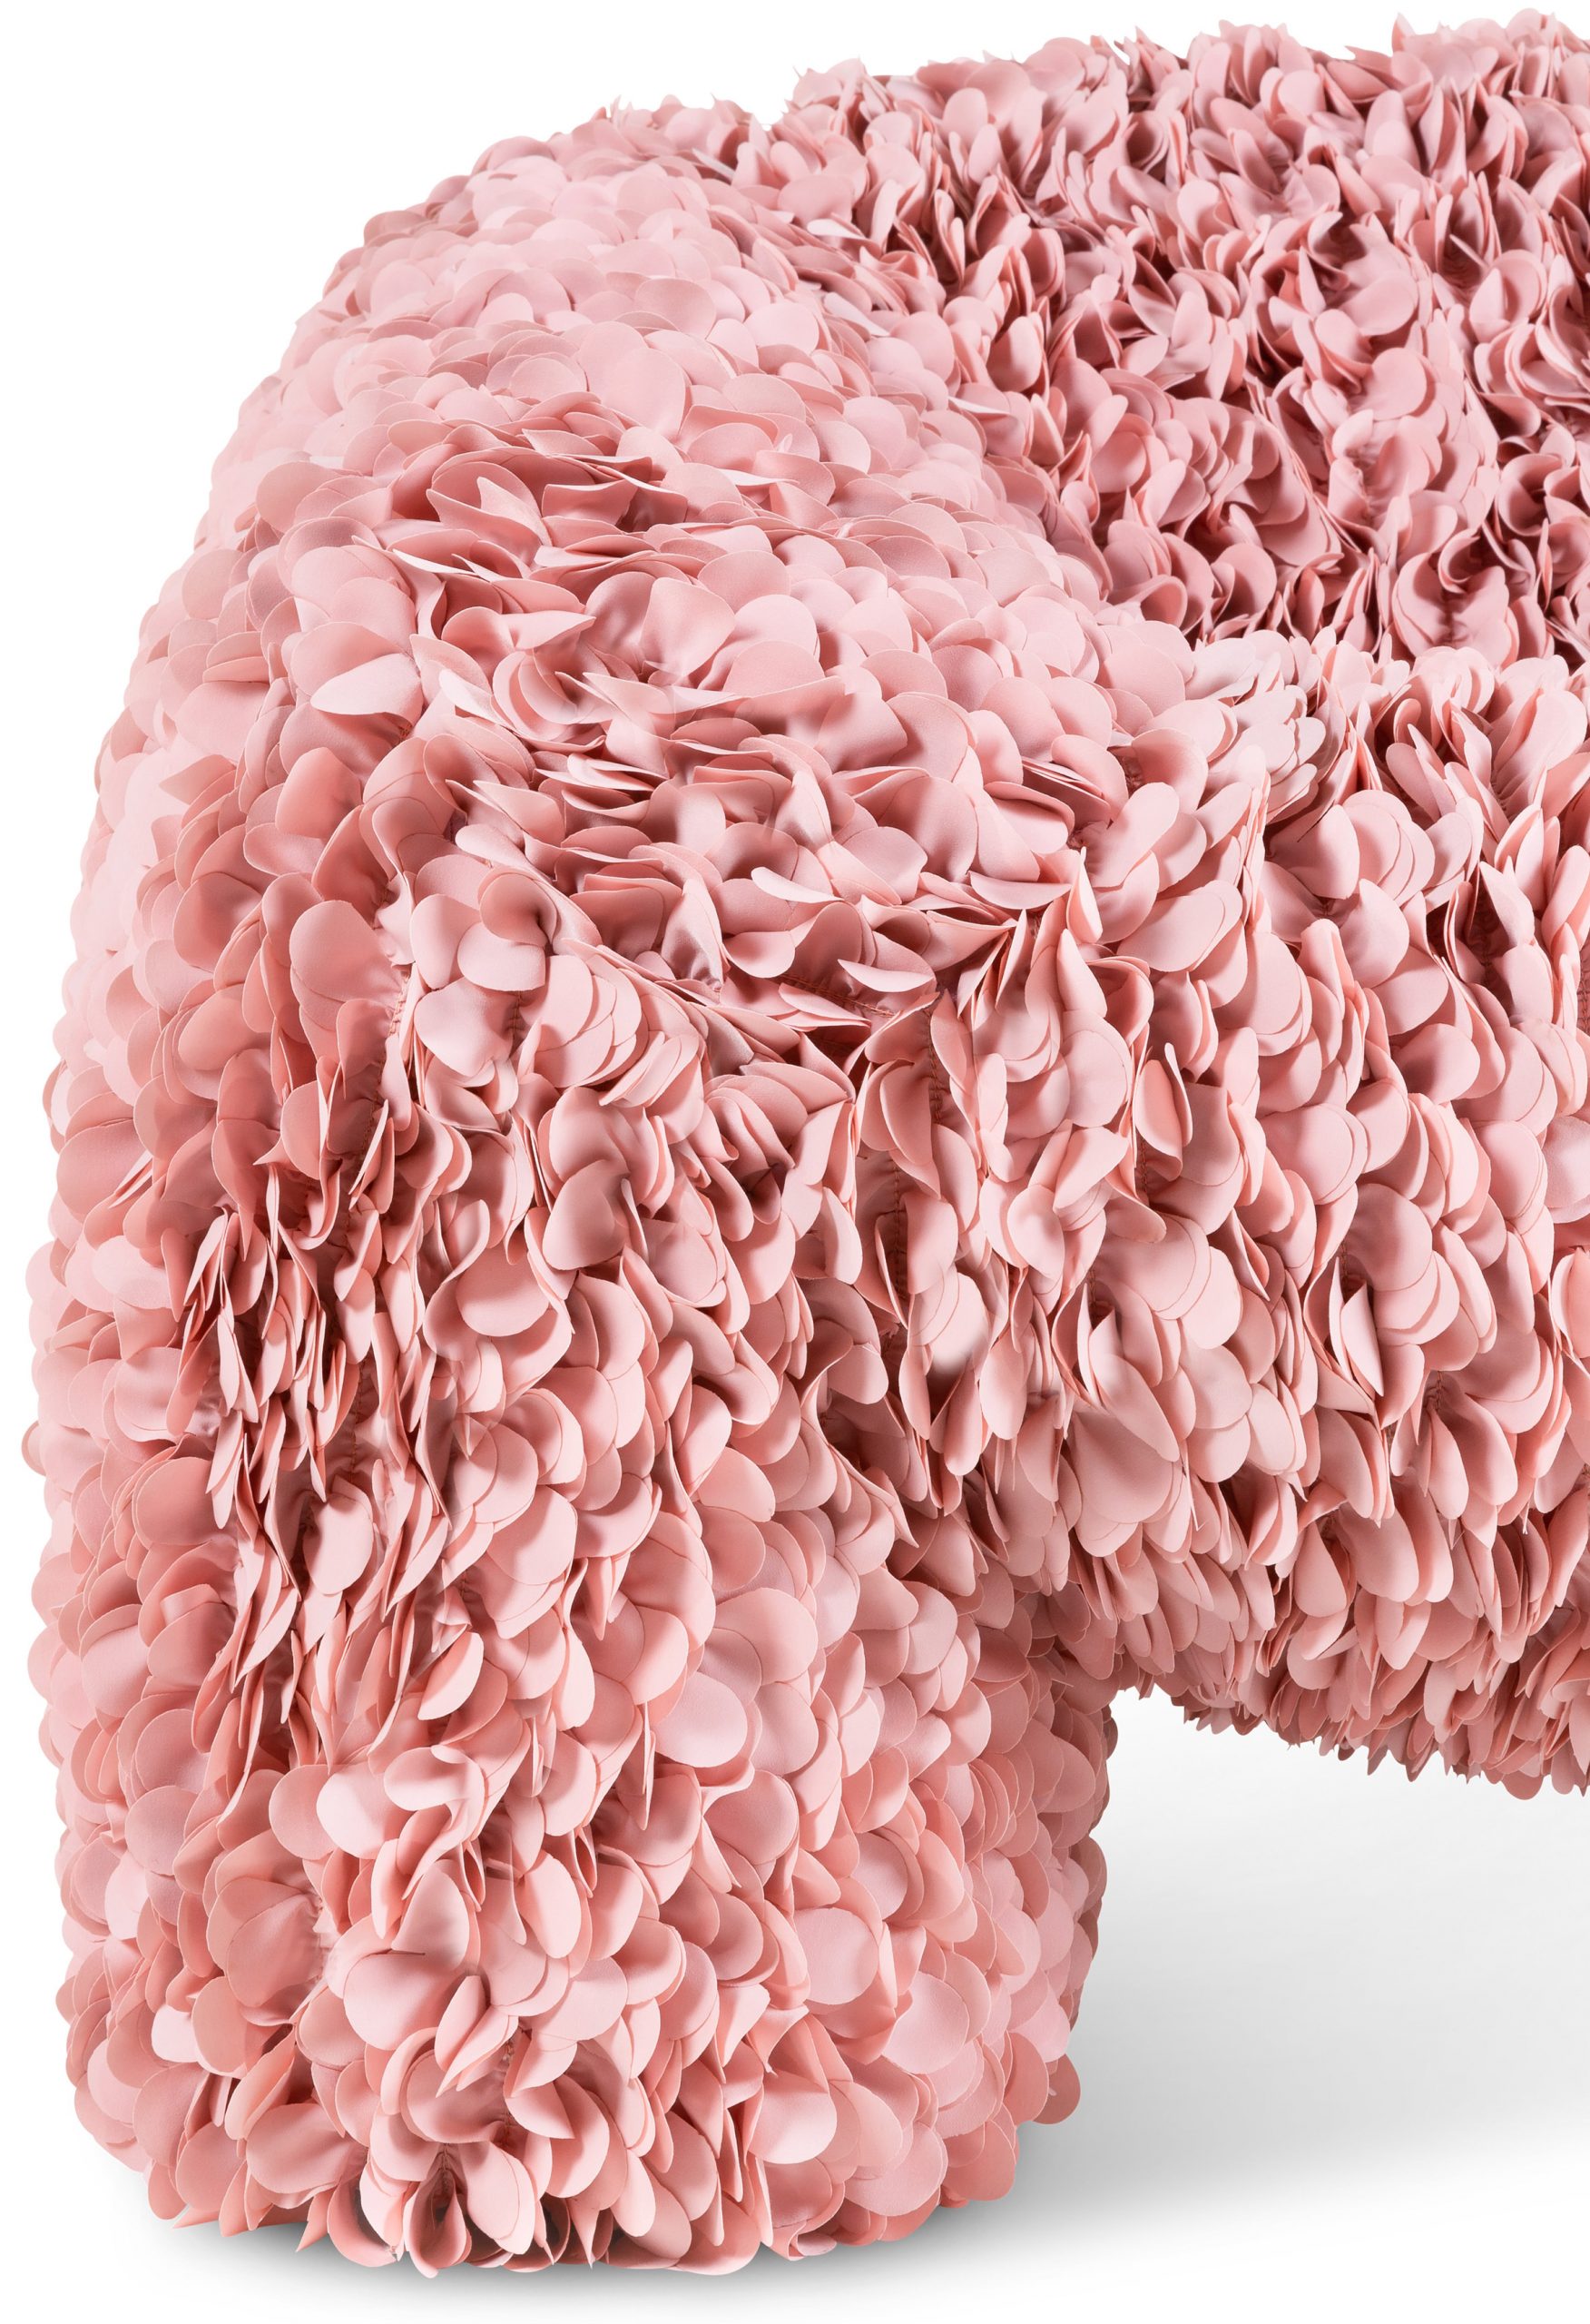 Close-up of pink petals on chair designed by Andrés Reisinger and Júlia Esqué for Moooi